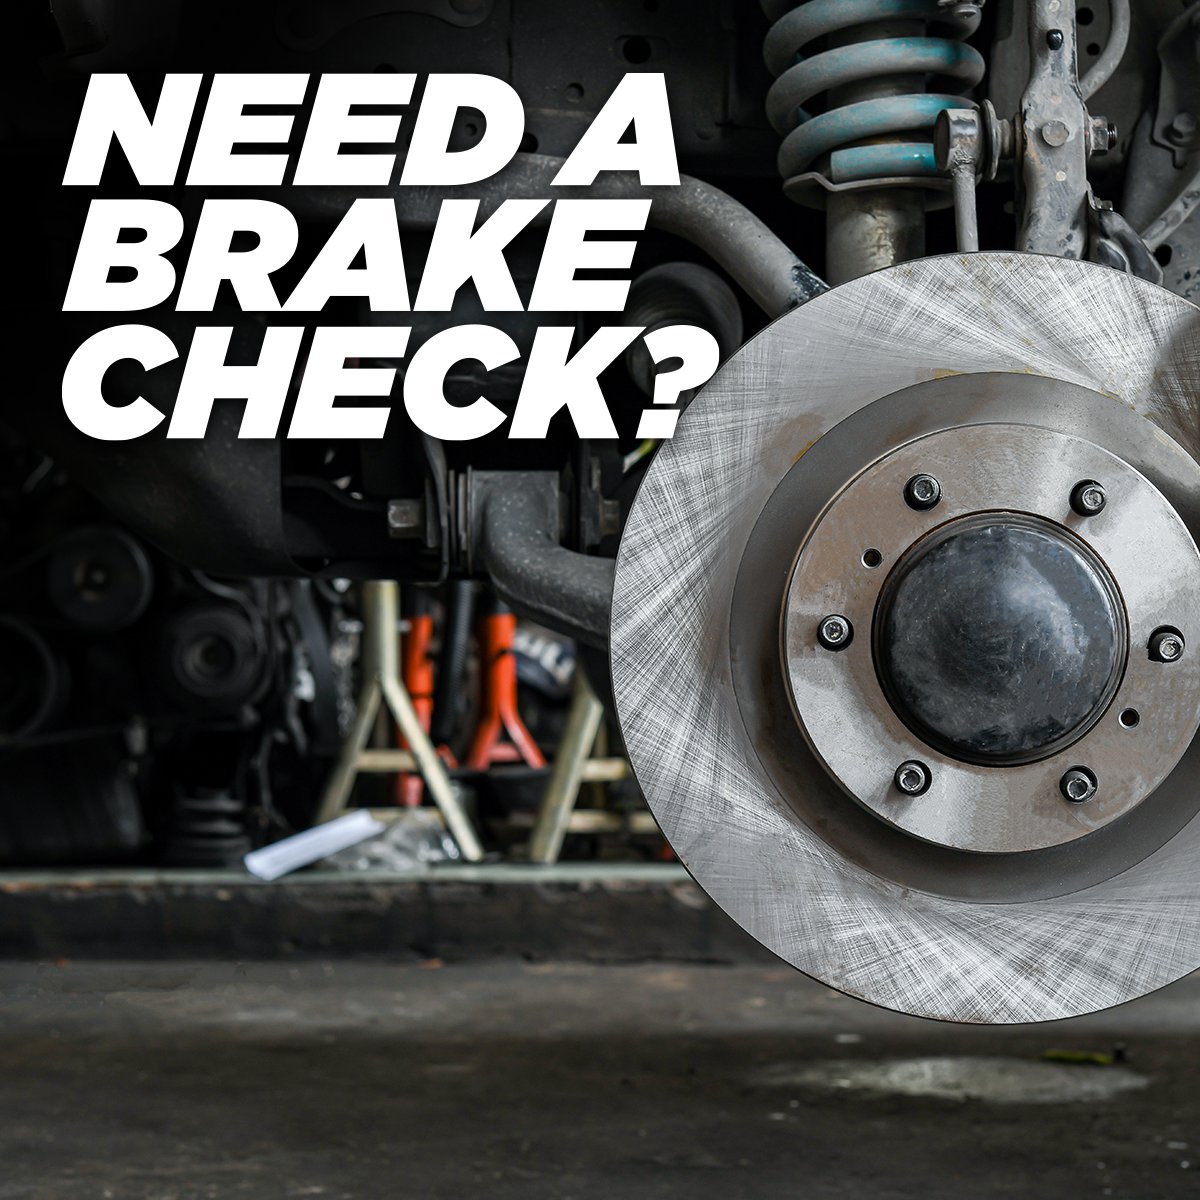 If you've noticed your brakes aren't as responsive as they once were, it might be time to give us a call. 

📞 (405) 222-0569
💻 ralphandsonstire.com
📍 707 S 4th Street, Chickasha, OK 73018